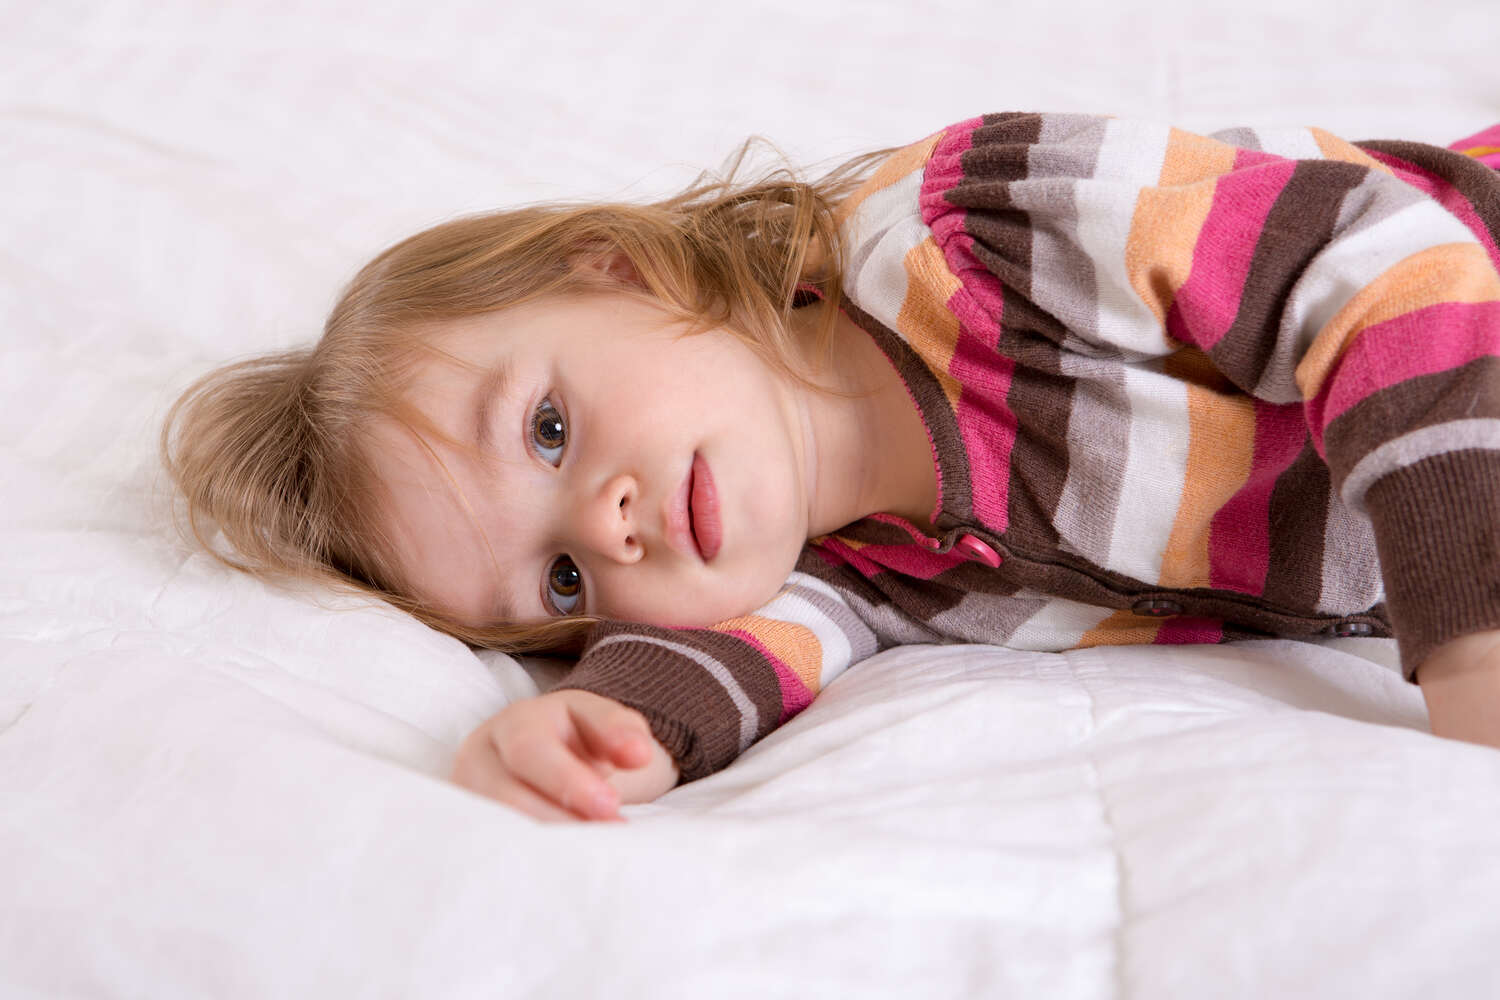 Feeling too hot or too cold may prevent toddler from sleeping